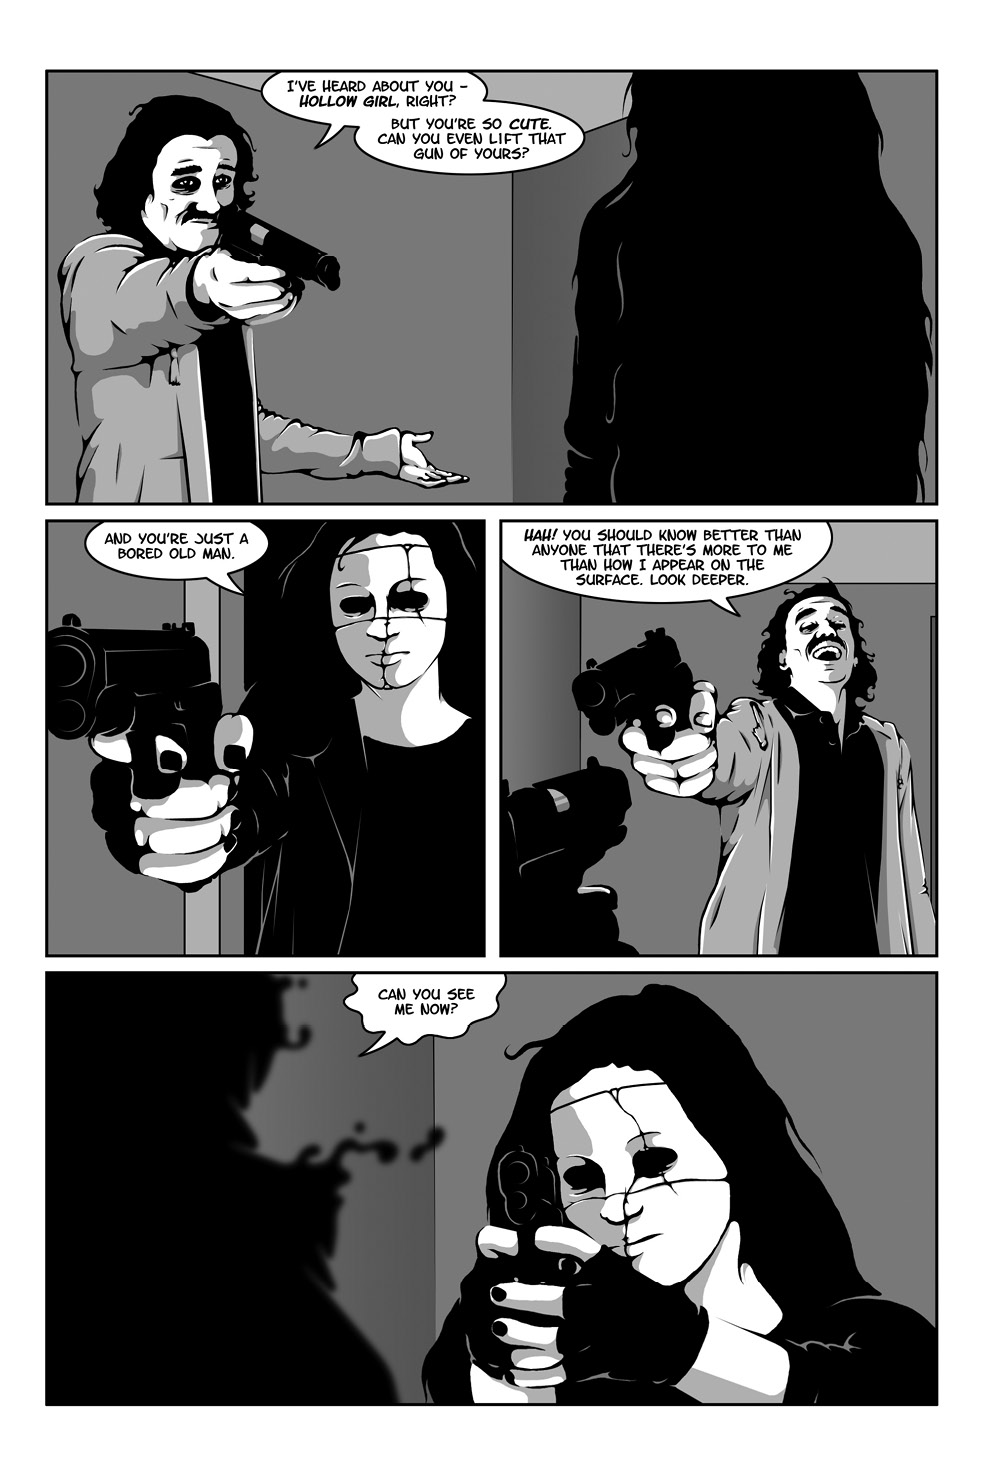 Read online Hollow Girl comic -  Issue #4 - 34